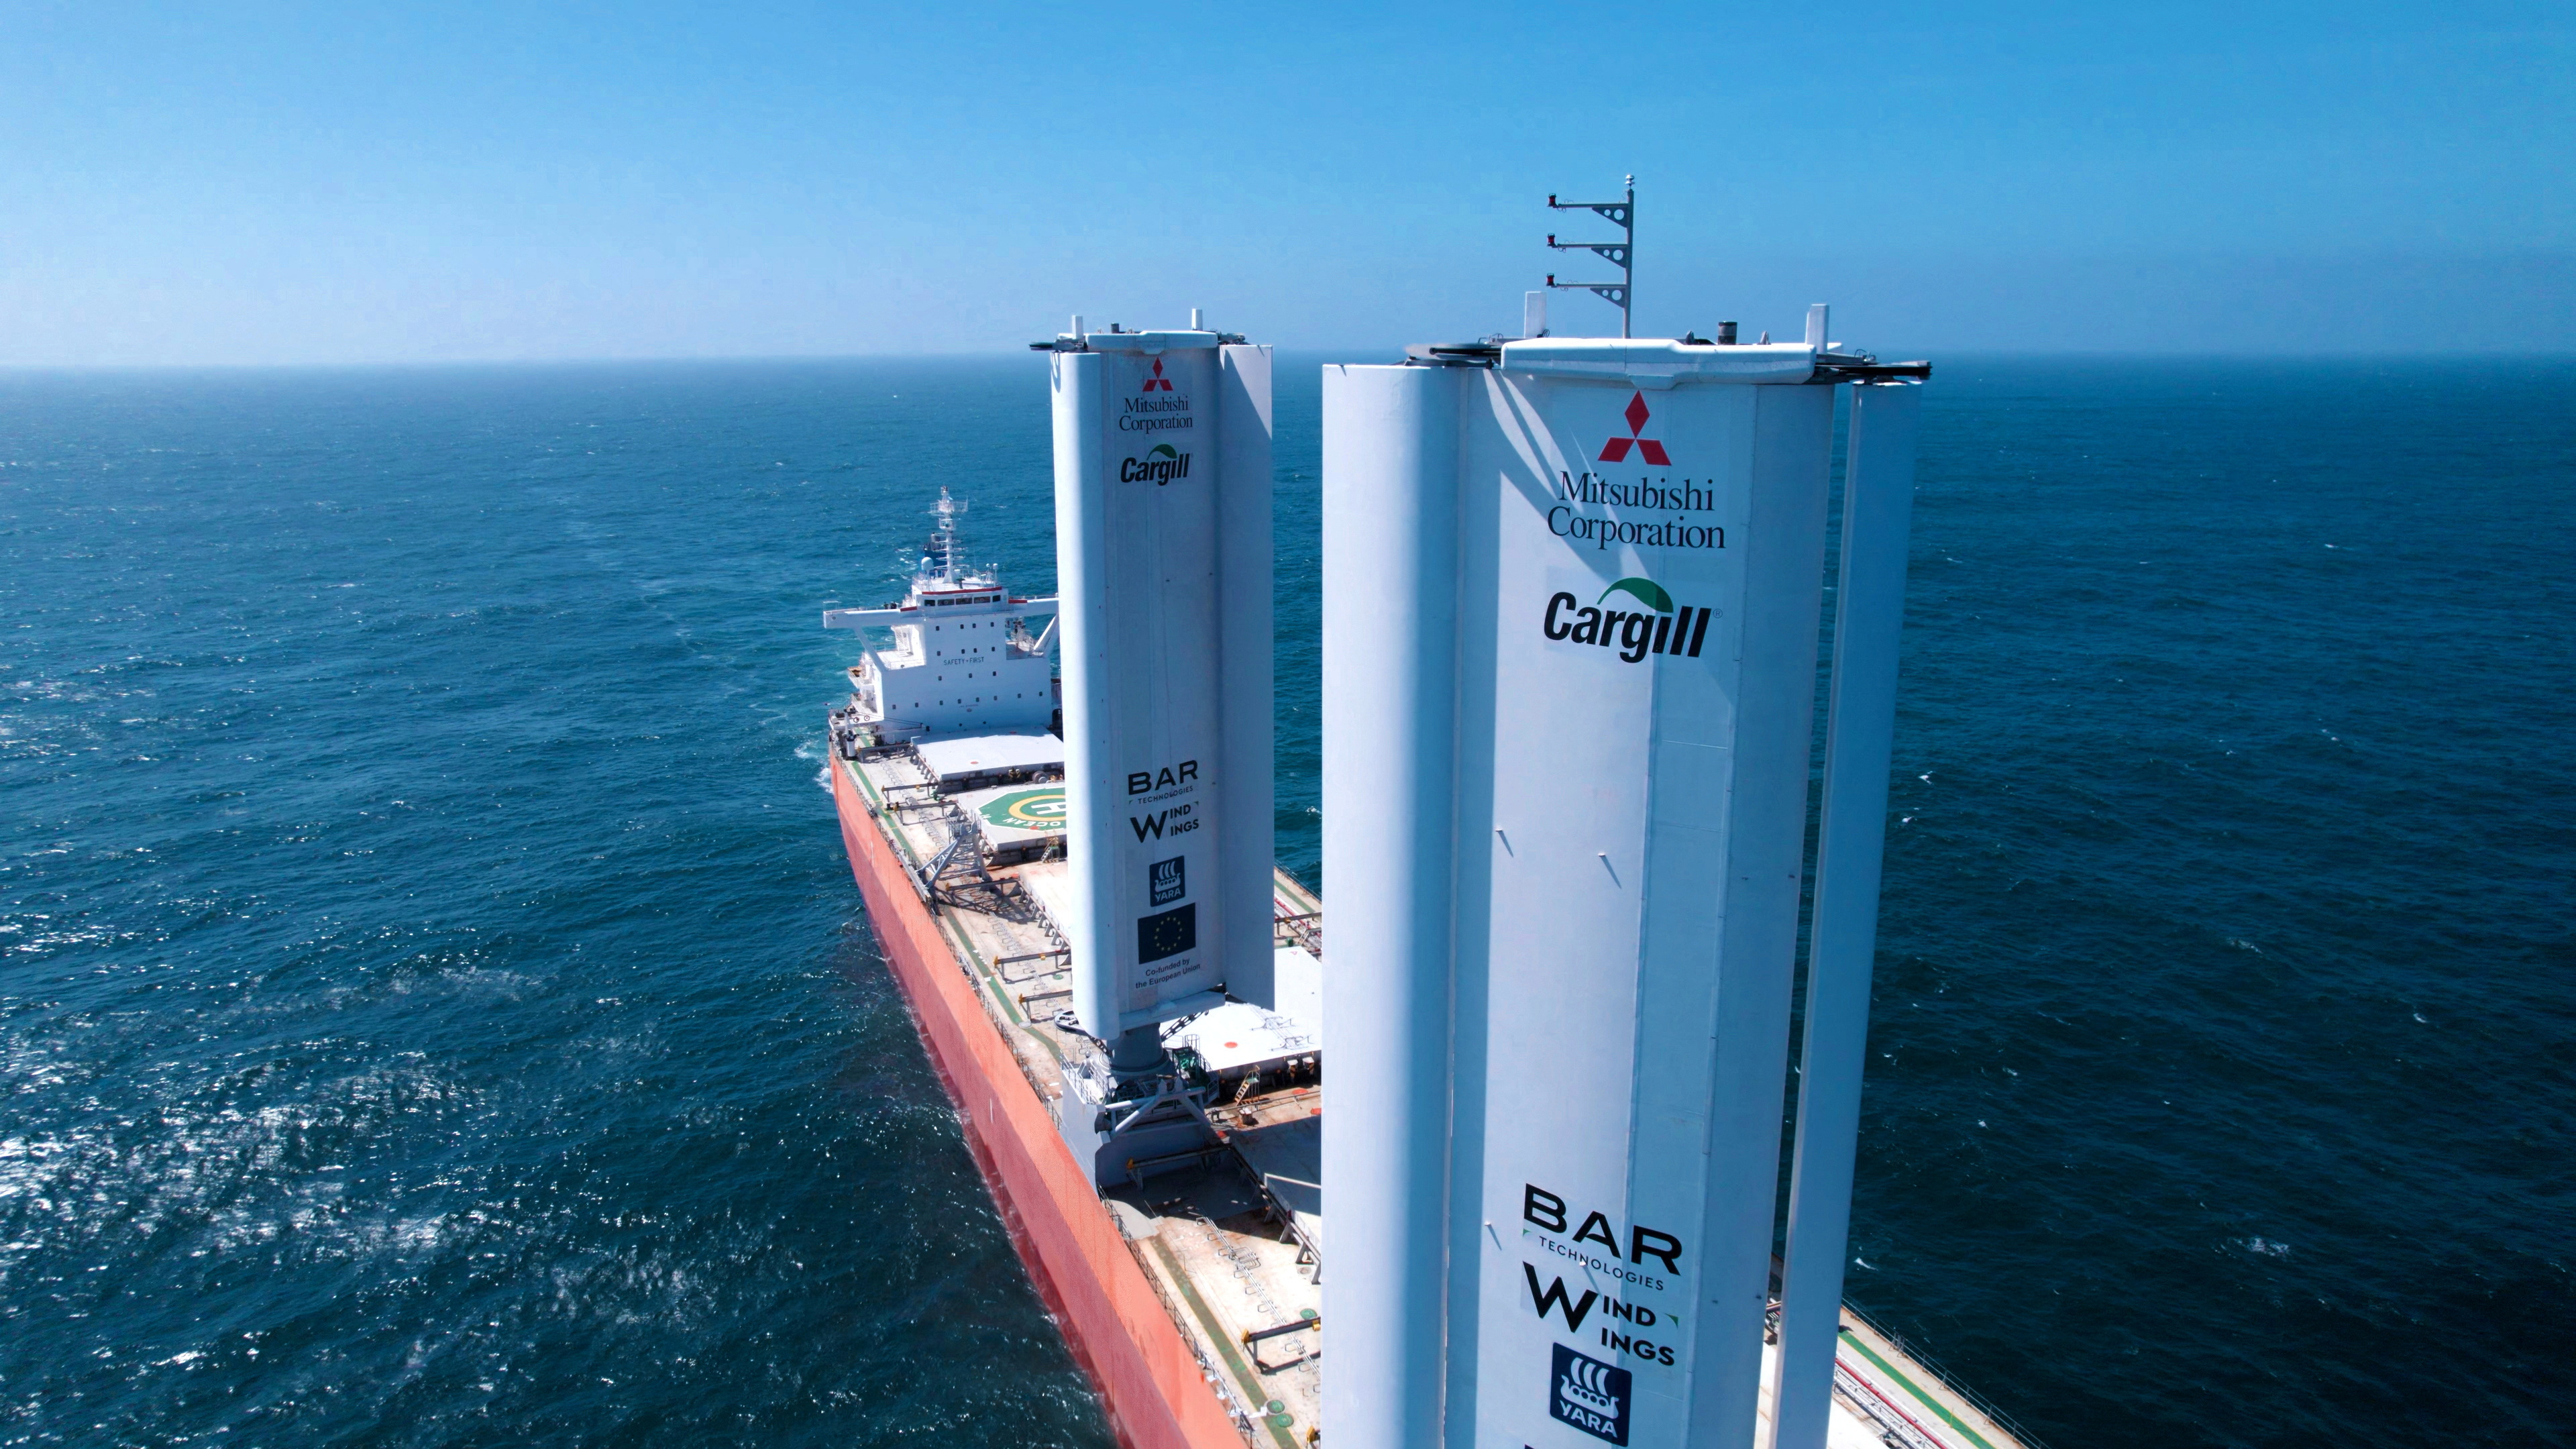 Cargill chartered ship sets sail to test wind power at sea | Reuters